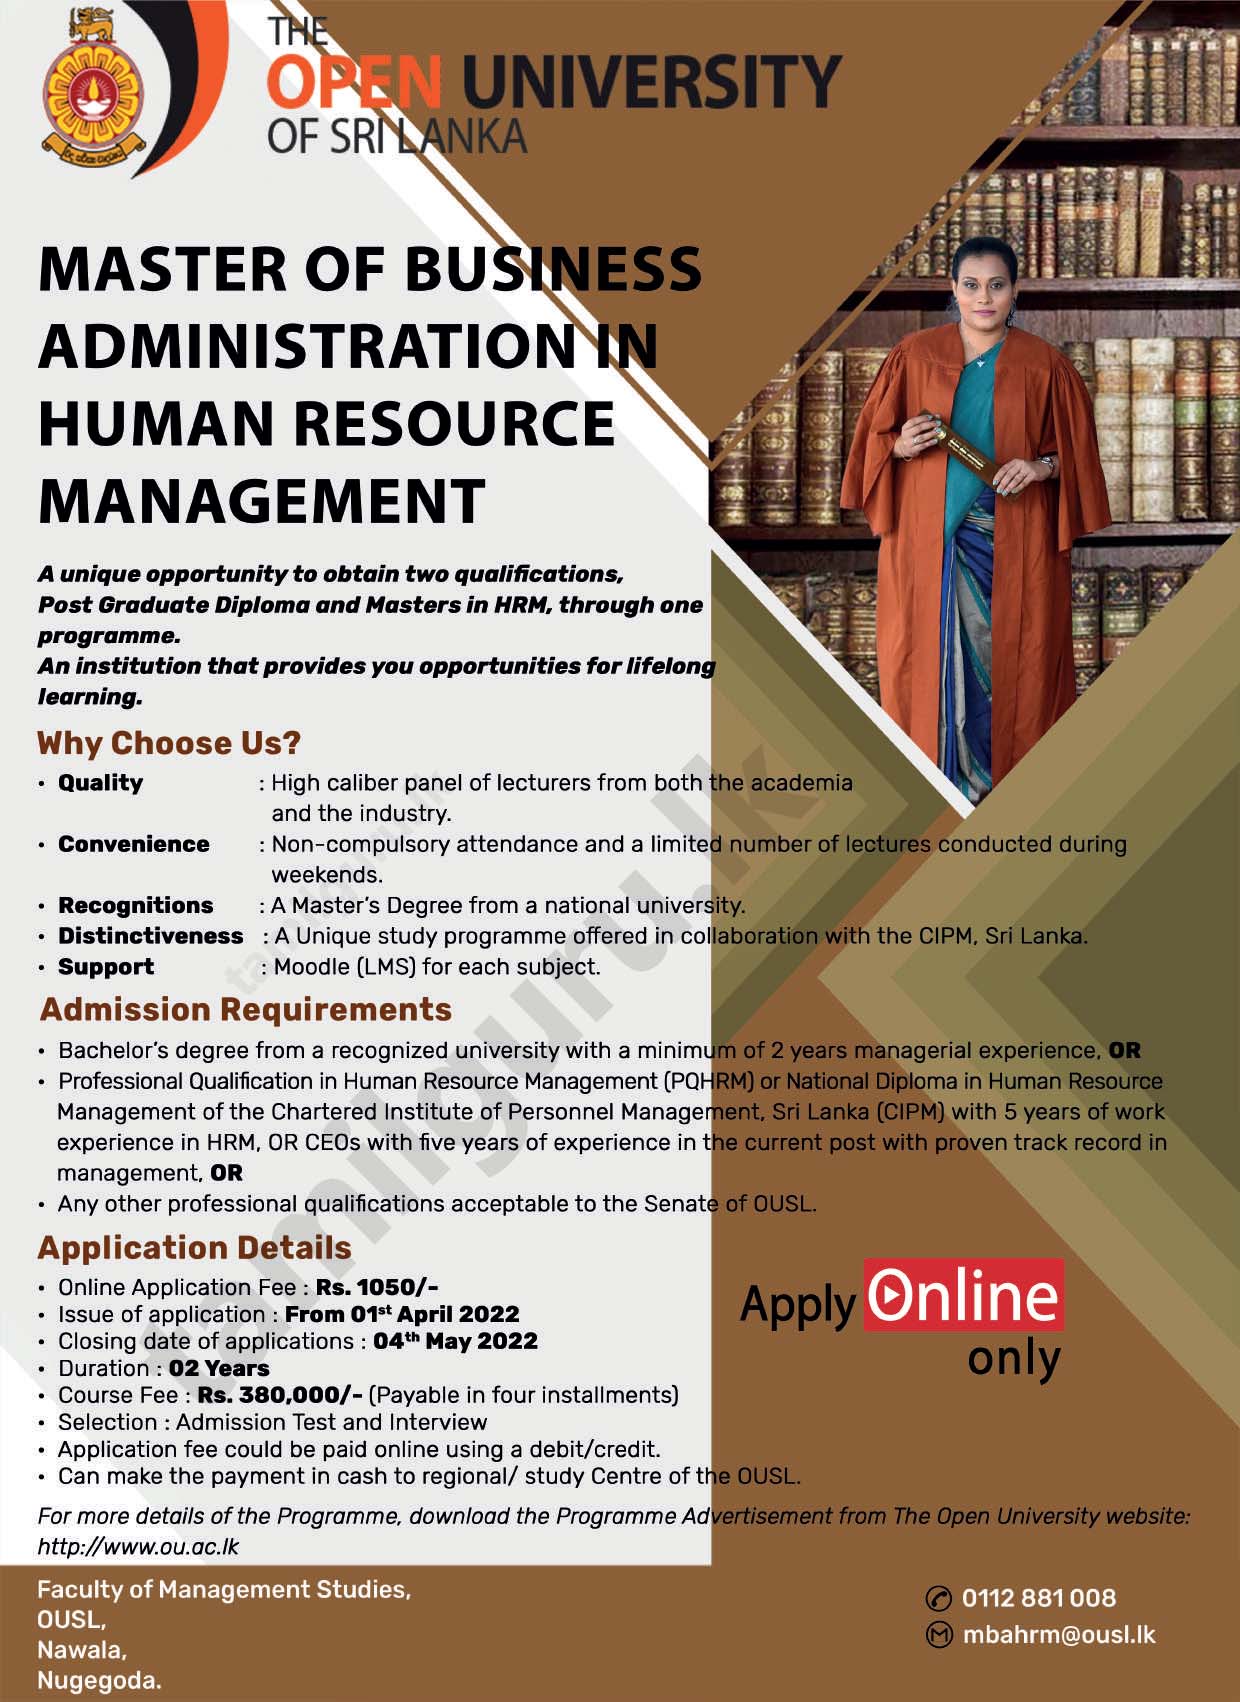 Calling Applications for Master of Business Administration (MBA) in Human Resource Management (HRM) 2022 Conducted by The Open University of Sri Lanka (OUSL)